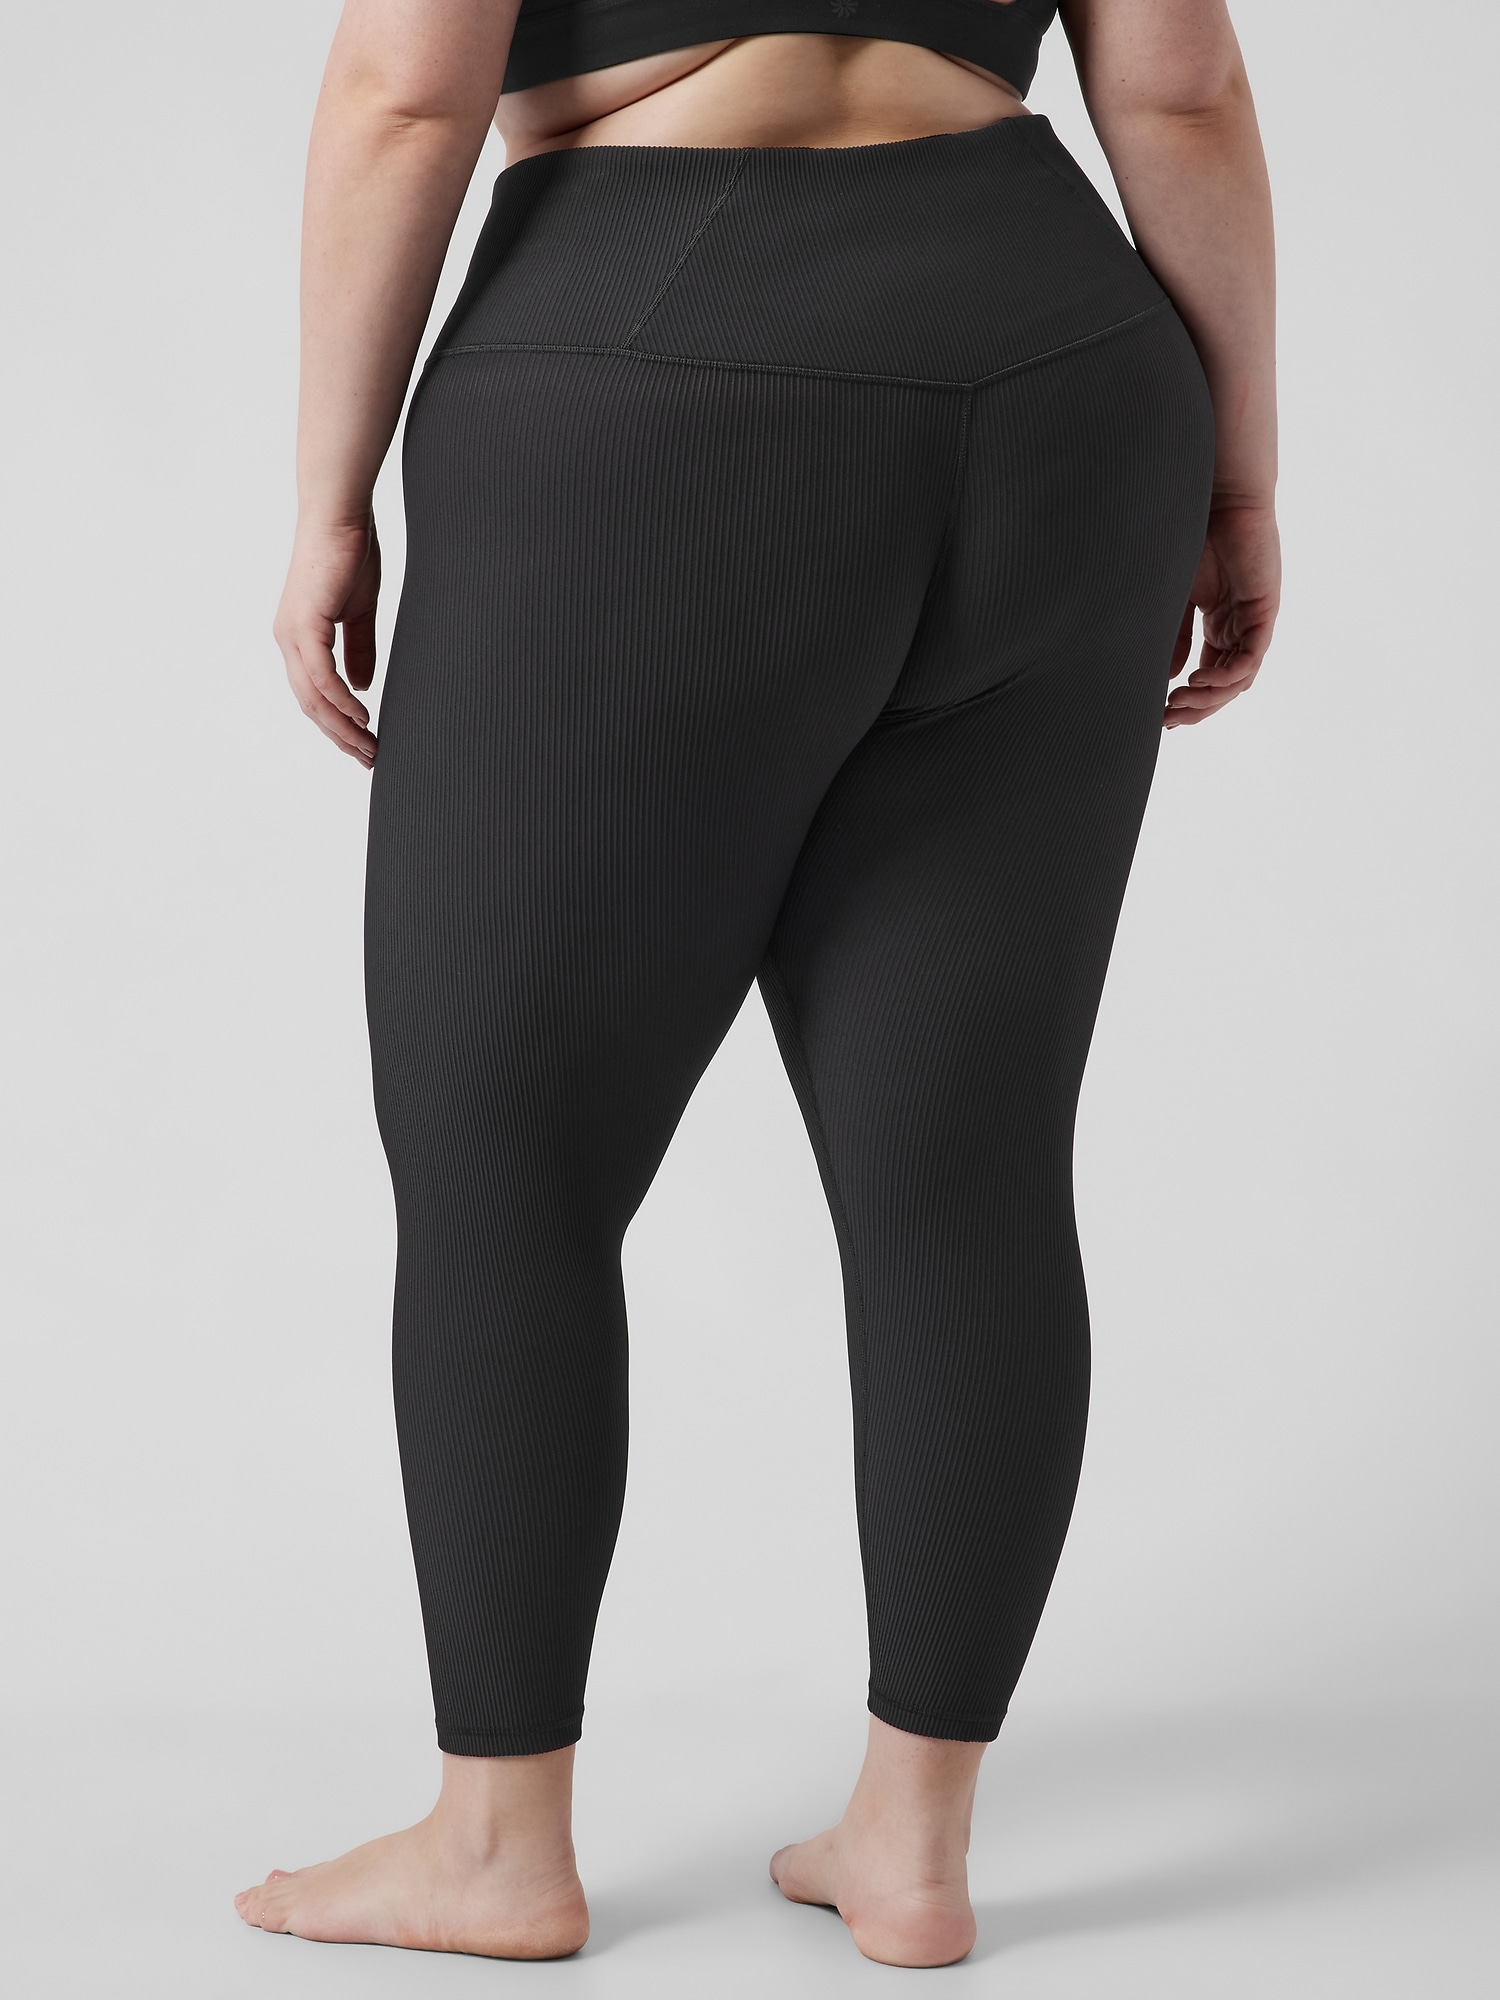 Athleta elation tights review-6 - Agent Athletica